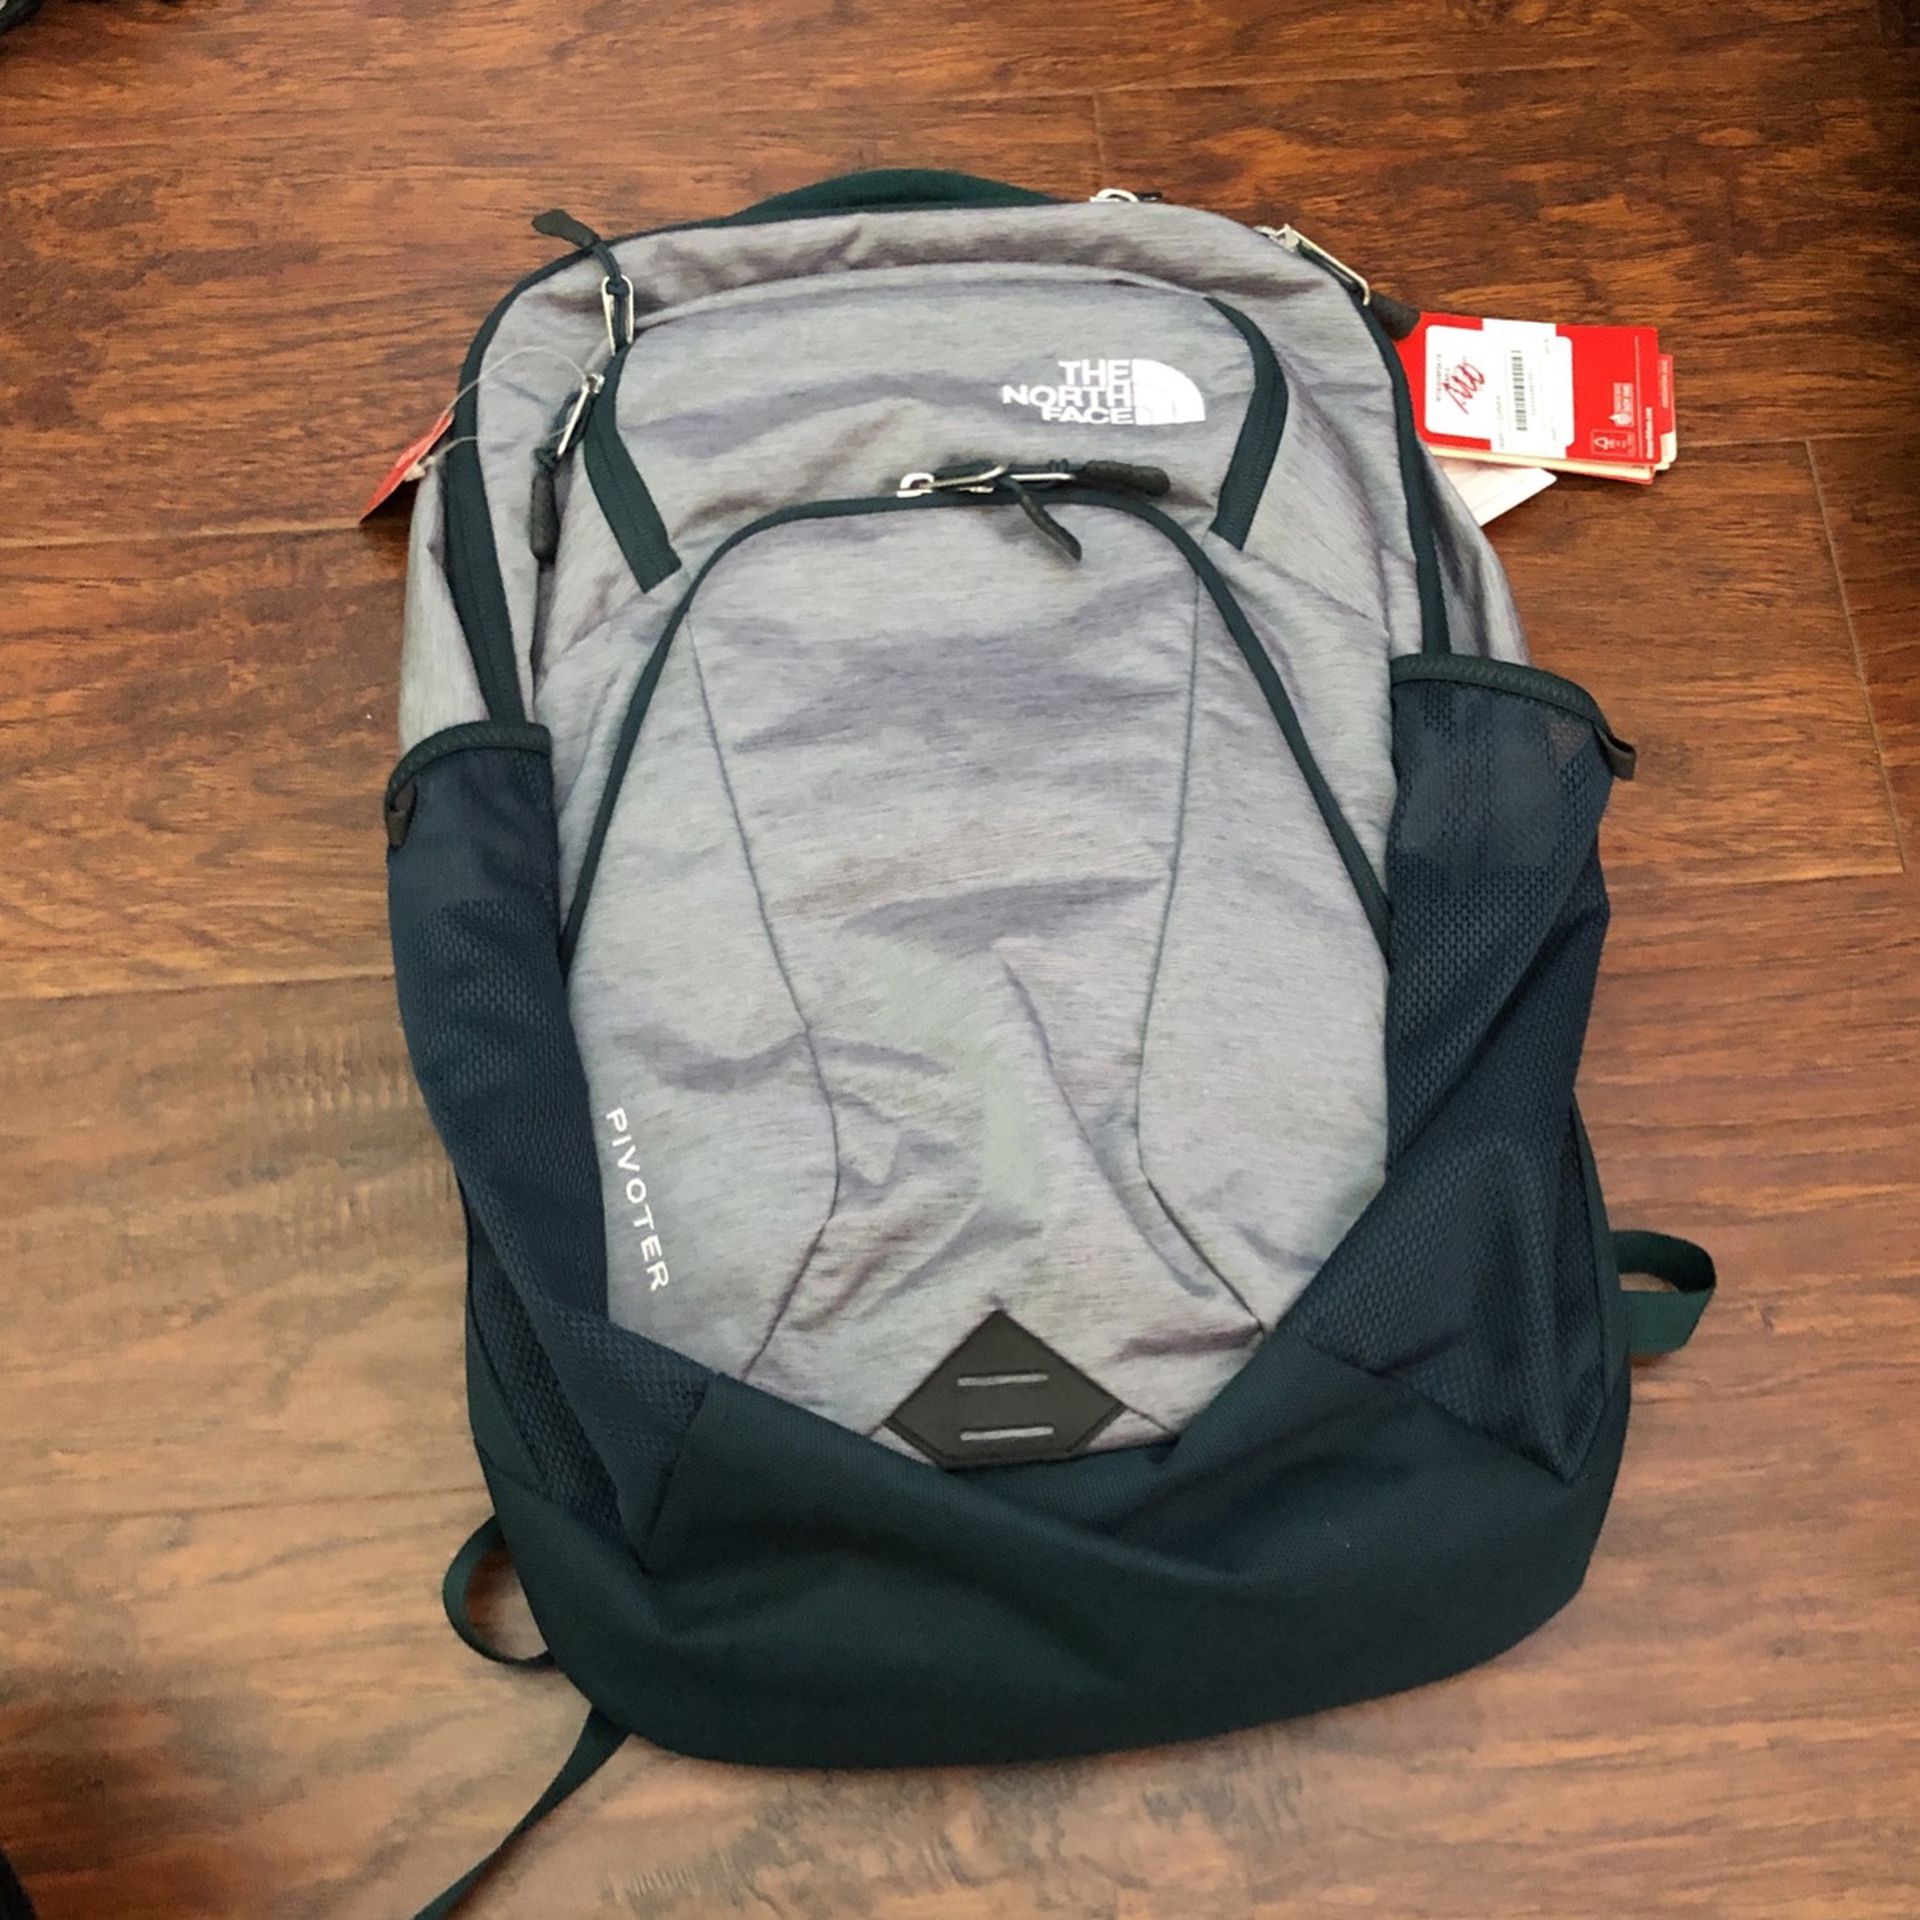 Backpack The Northface